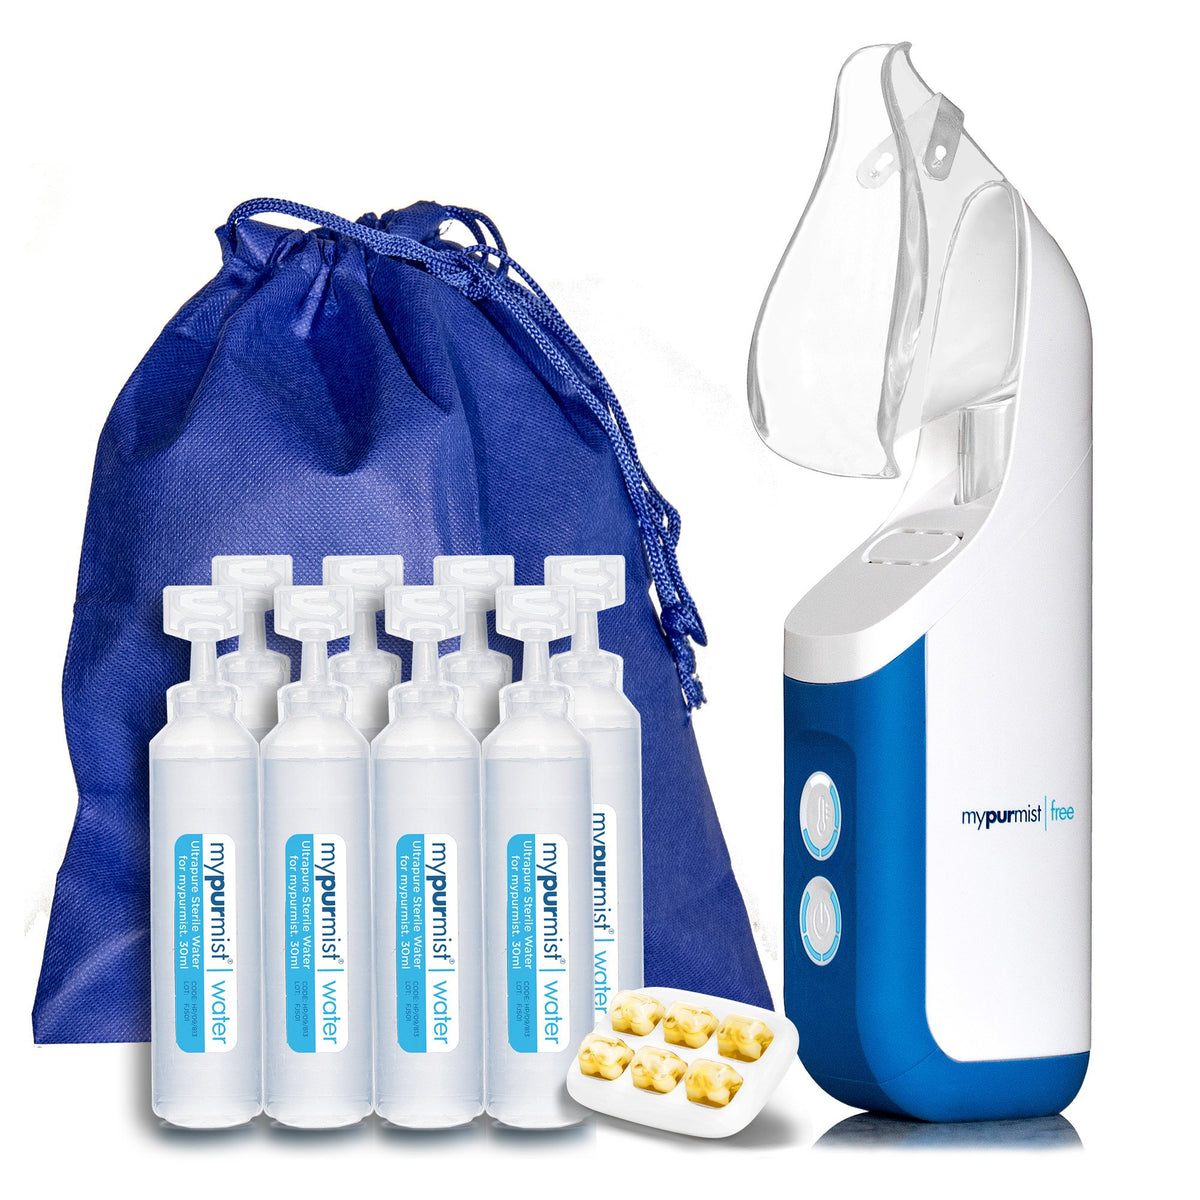 mypurmist free cordless personal steam inhaler kit - free of germs and allergens, 100% natural, drug-free, ultrapure therapy for sinus congestion, colds and allerfies.